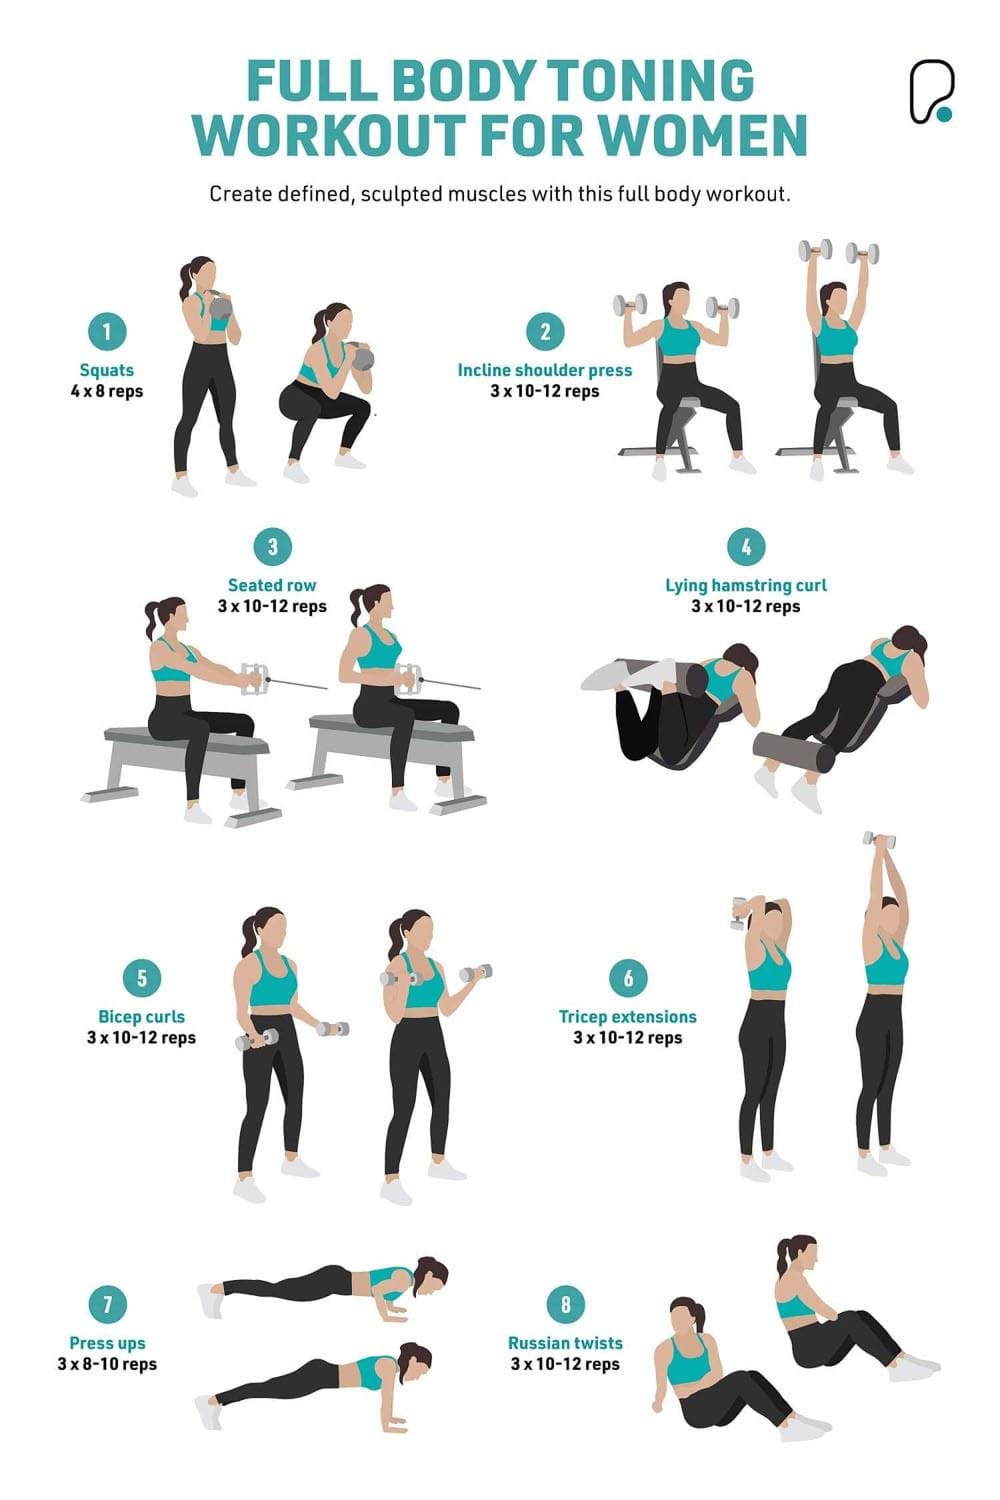 The Best Full Body Toning Workout Plan For Women | PureGym